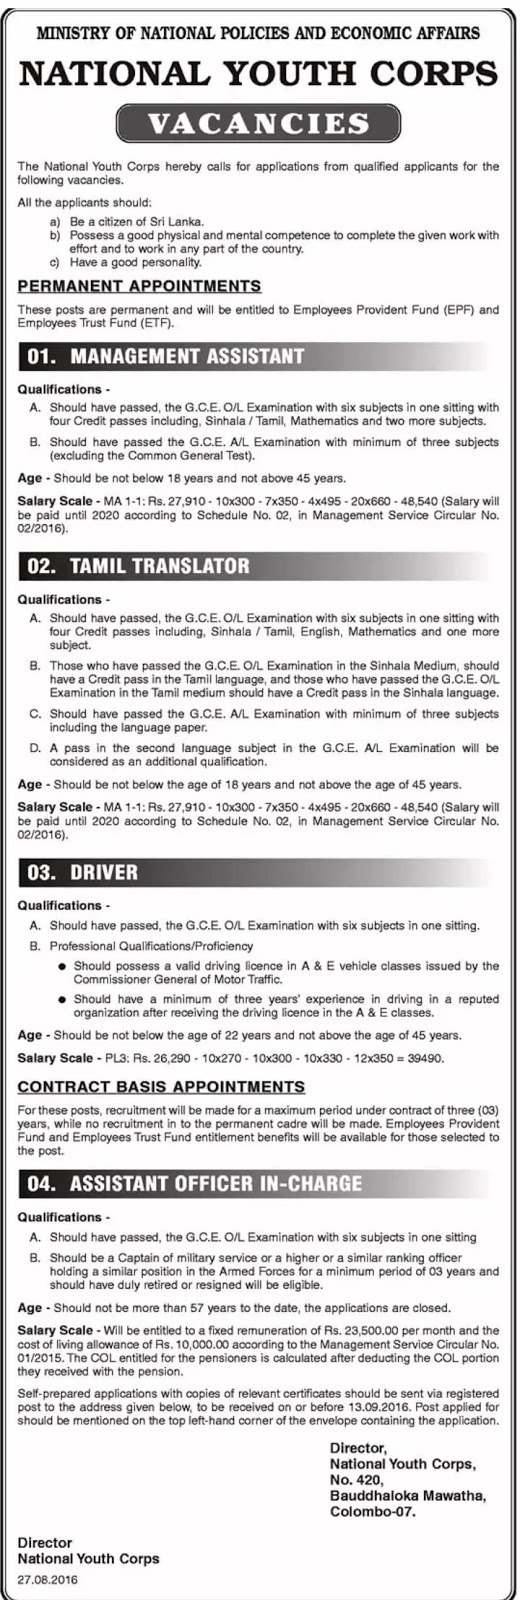 Management Assistant / translator / Driver Vacancies in National Youth Corps